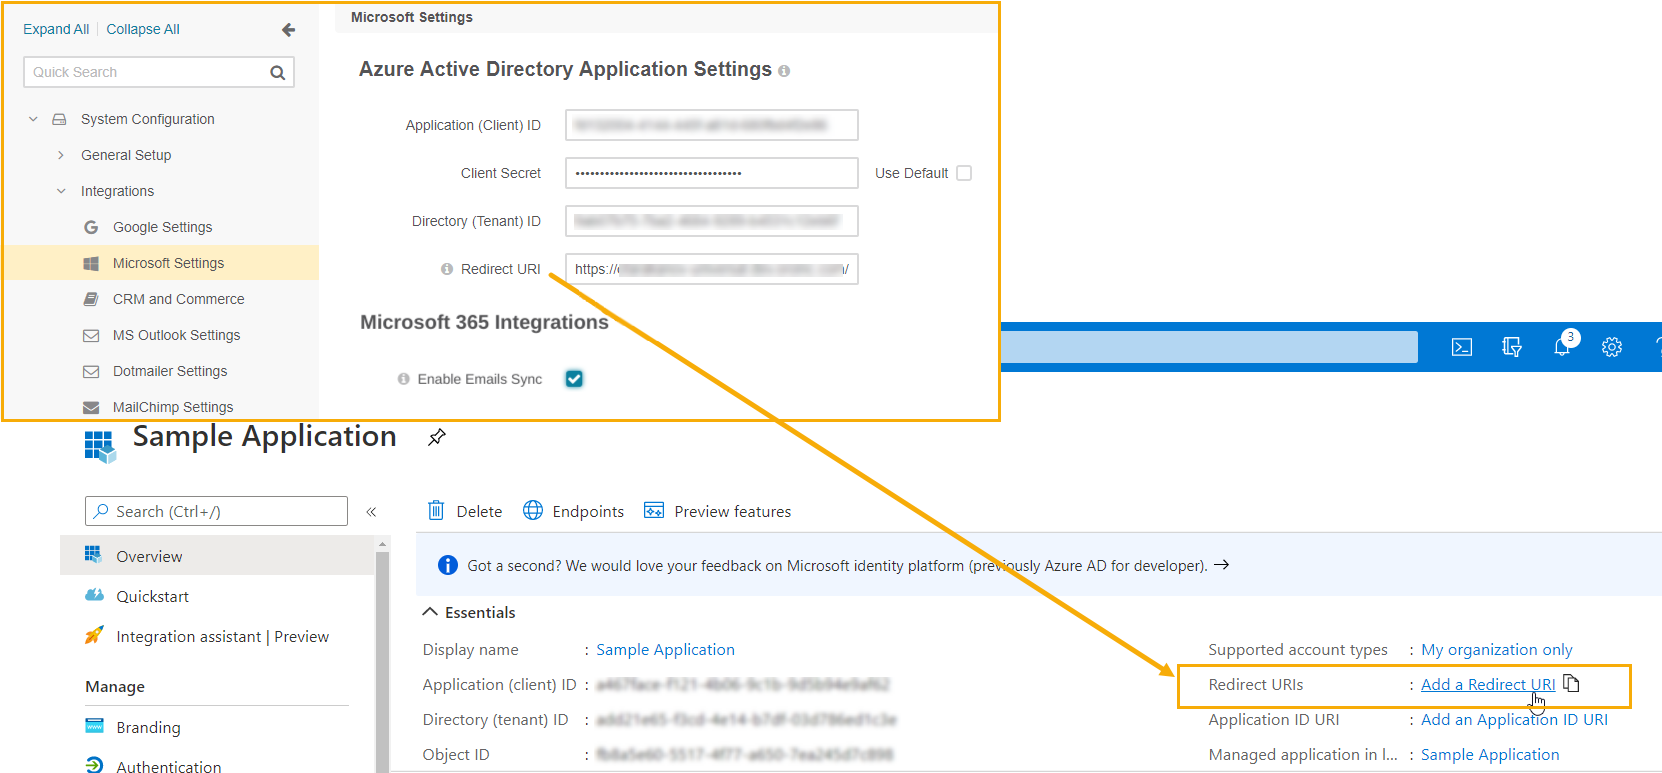 Copy Redirect URI and paste it into the Azure application settings